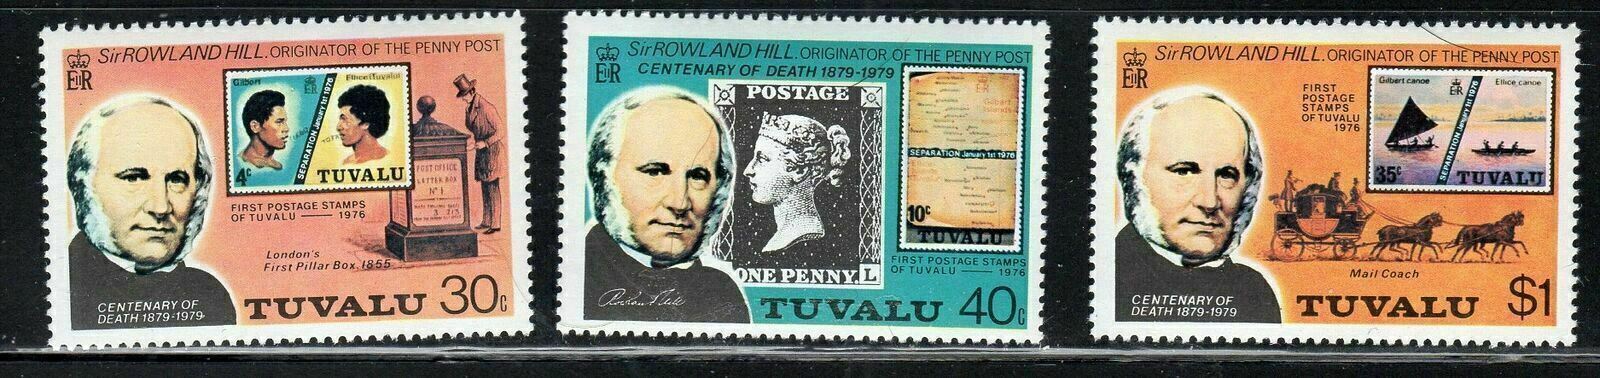 Tuvalu Stamps  Stamps    Mint Never Hinged   Lot  7928